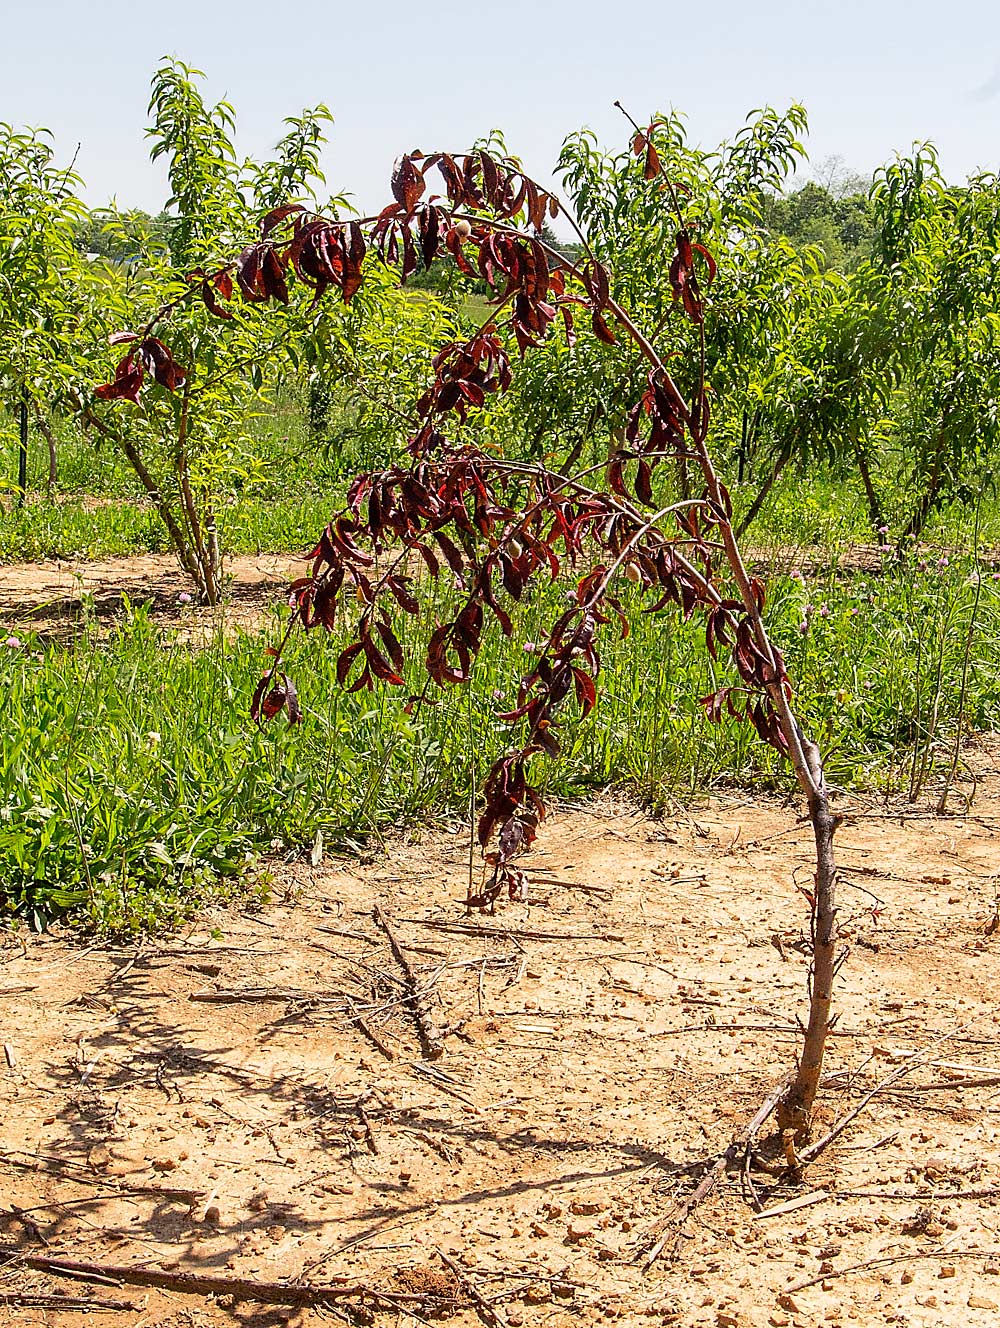 A red leaf, weeping peach tree grows at the station in May 2018. Researchers think the red leaf trait could be beneficial if bred into rootstocks, allowing growers to rapidly identify and remove rootstock shoots.  (Kate Prengaman/Good Fruit Grower)